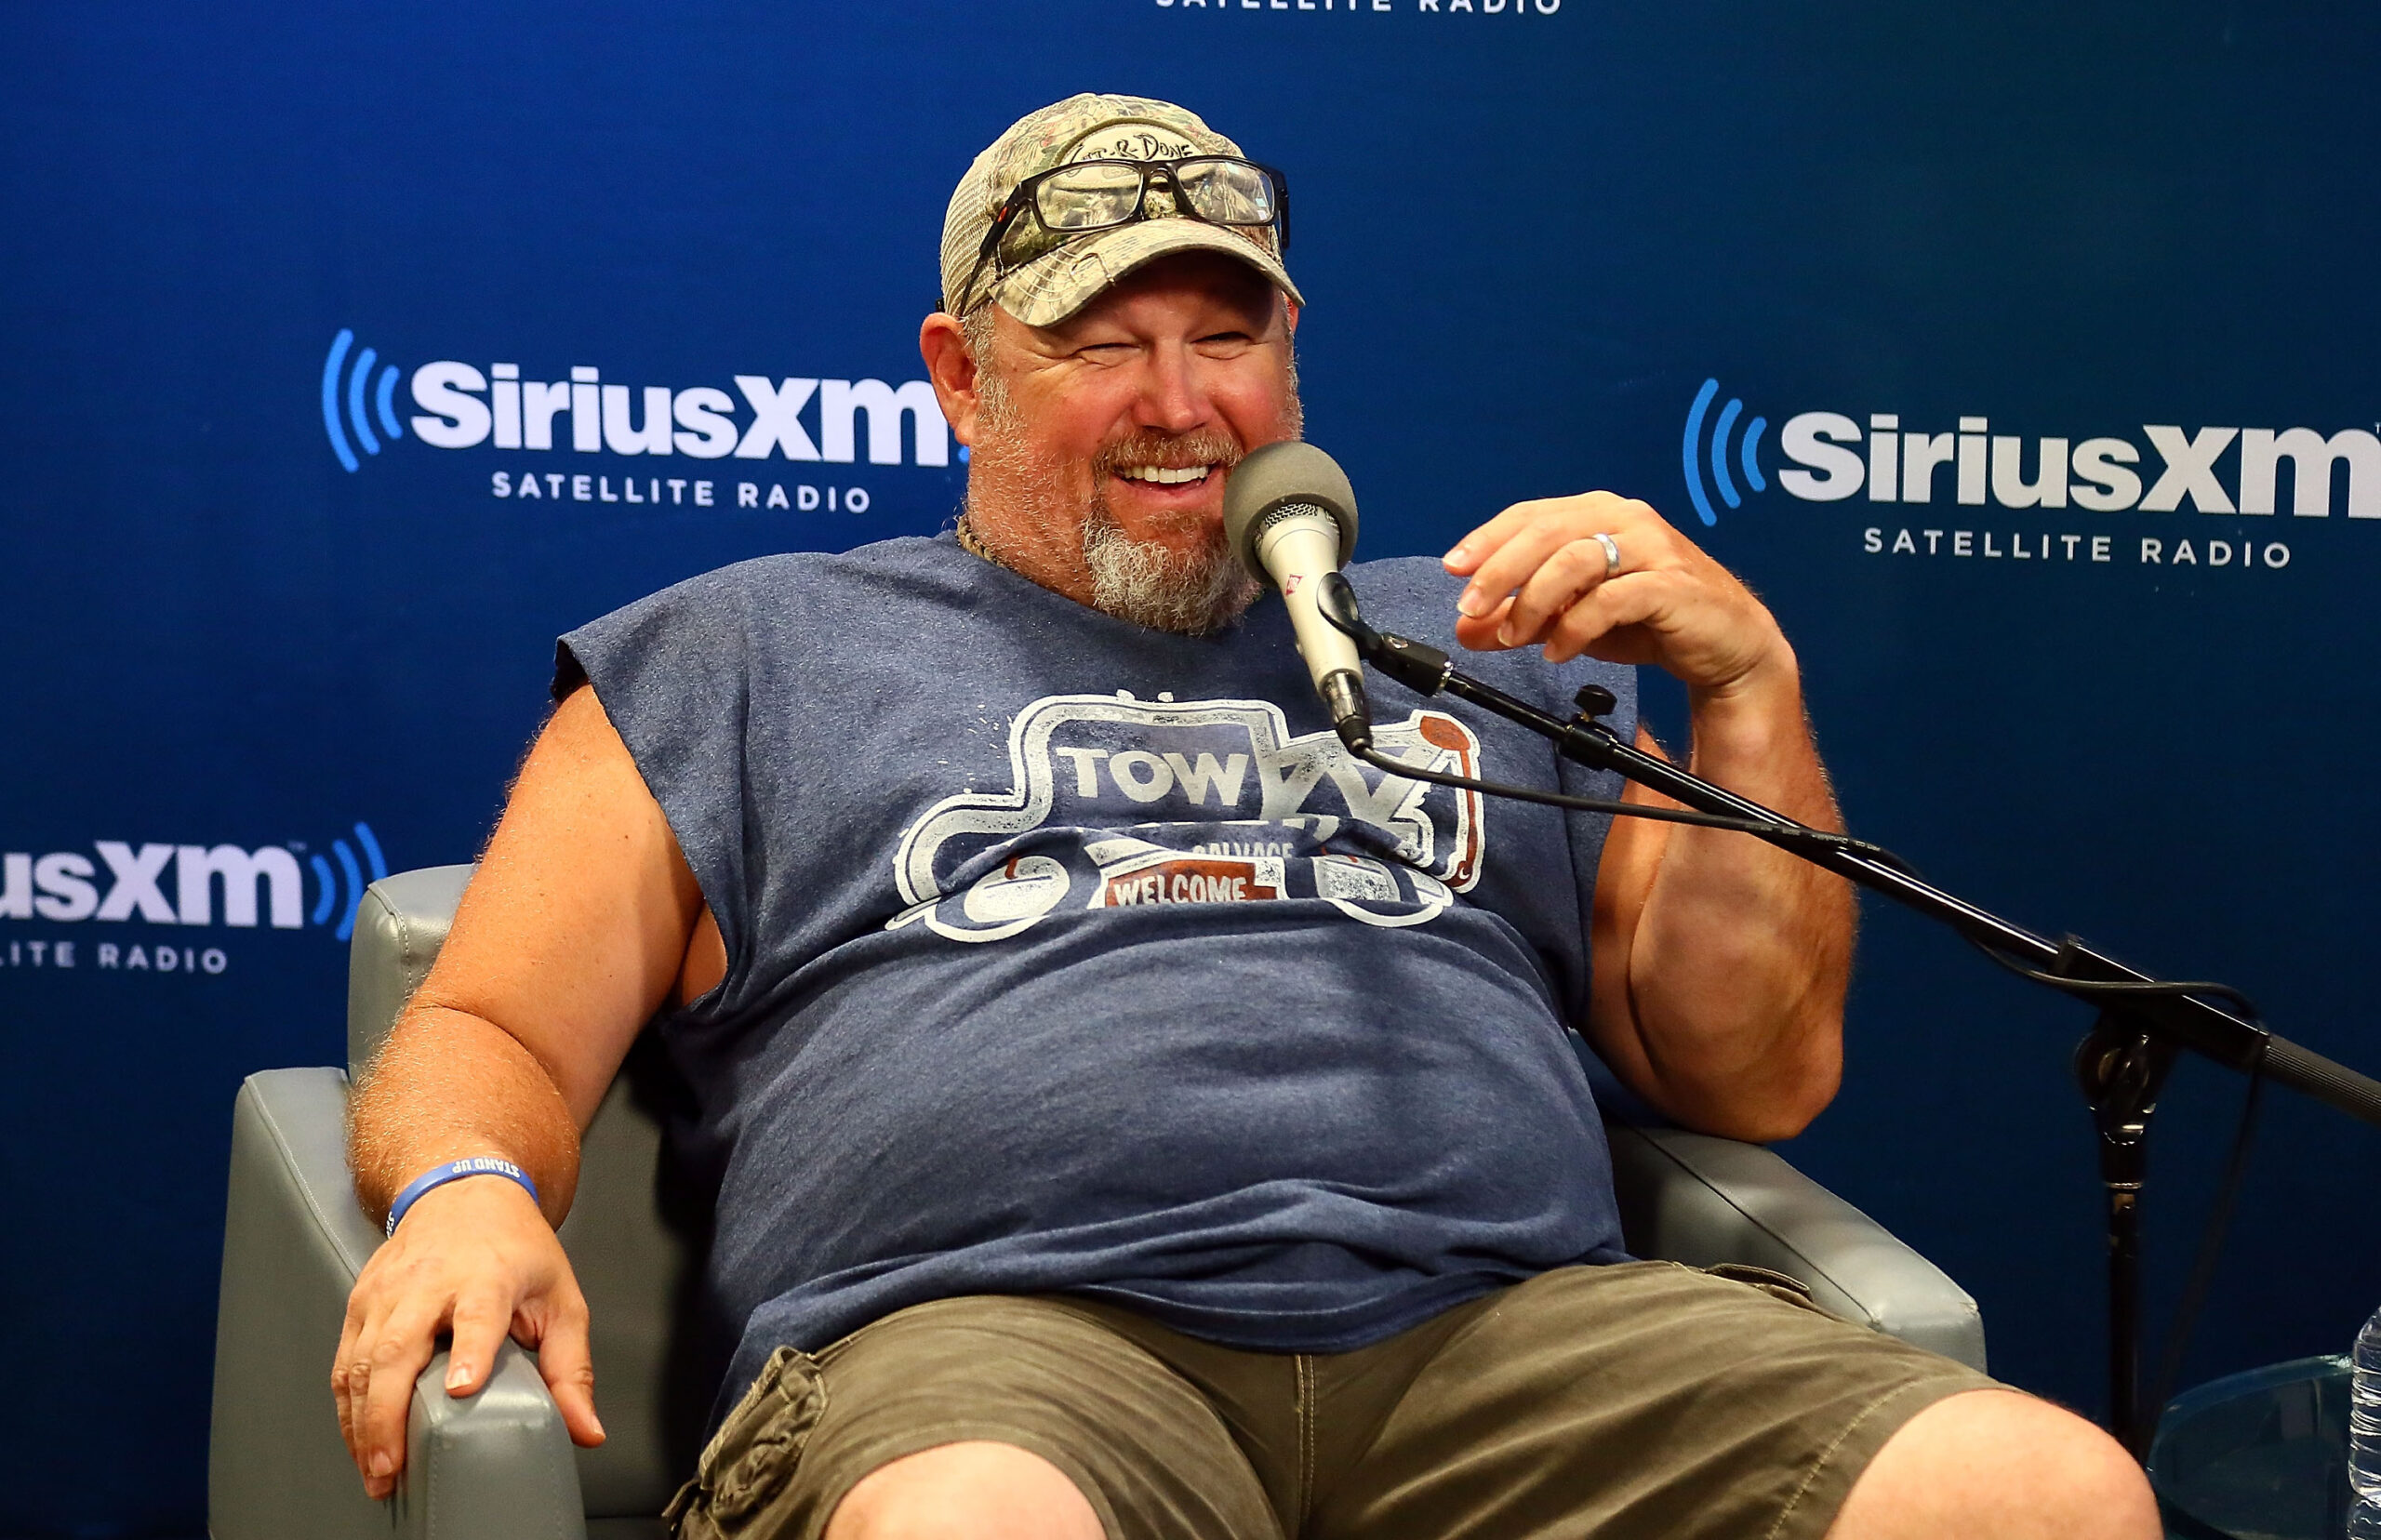 SiriusXM's Larry the Cable Guy Discusses His New Film With Jim Breuer During A SiriusXM "Town Hall"